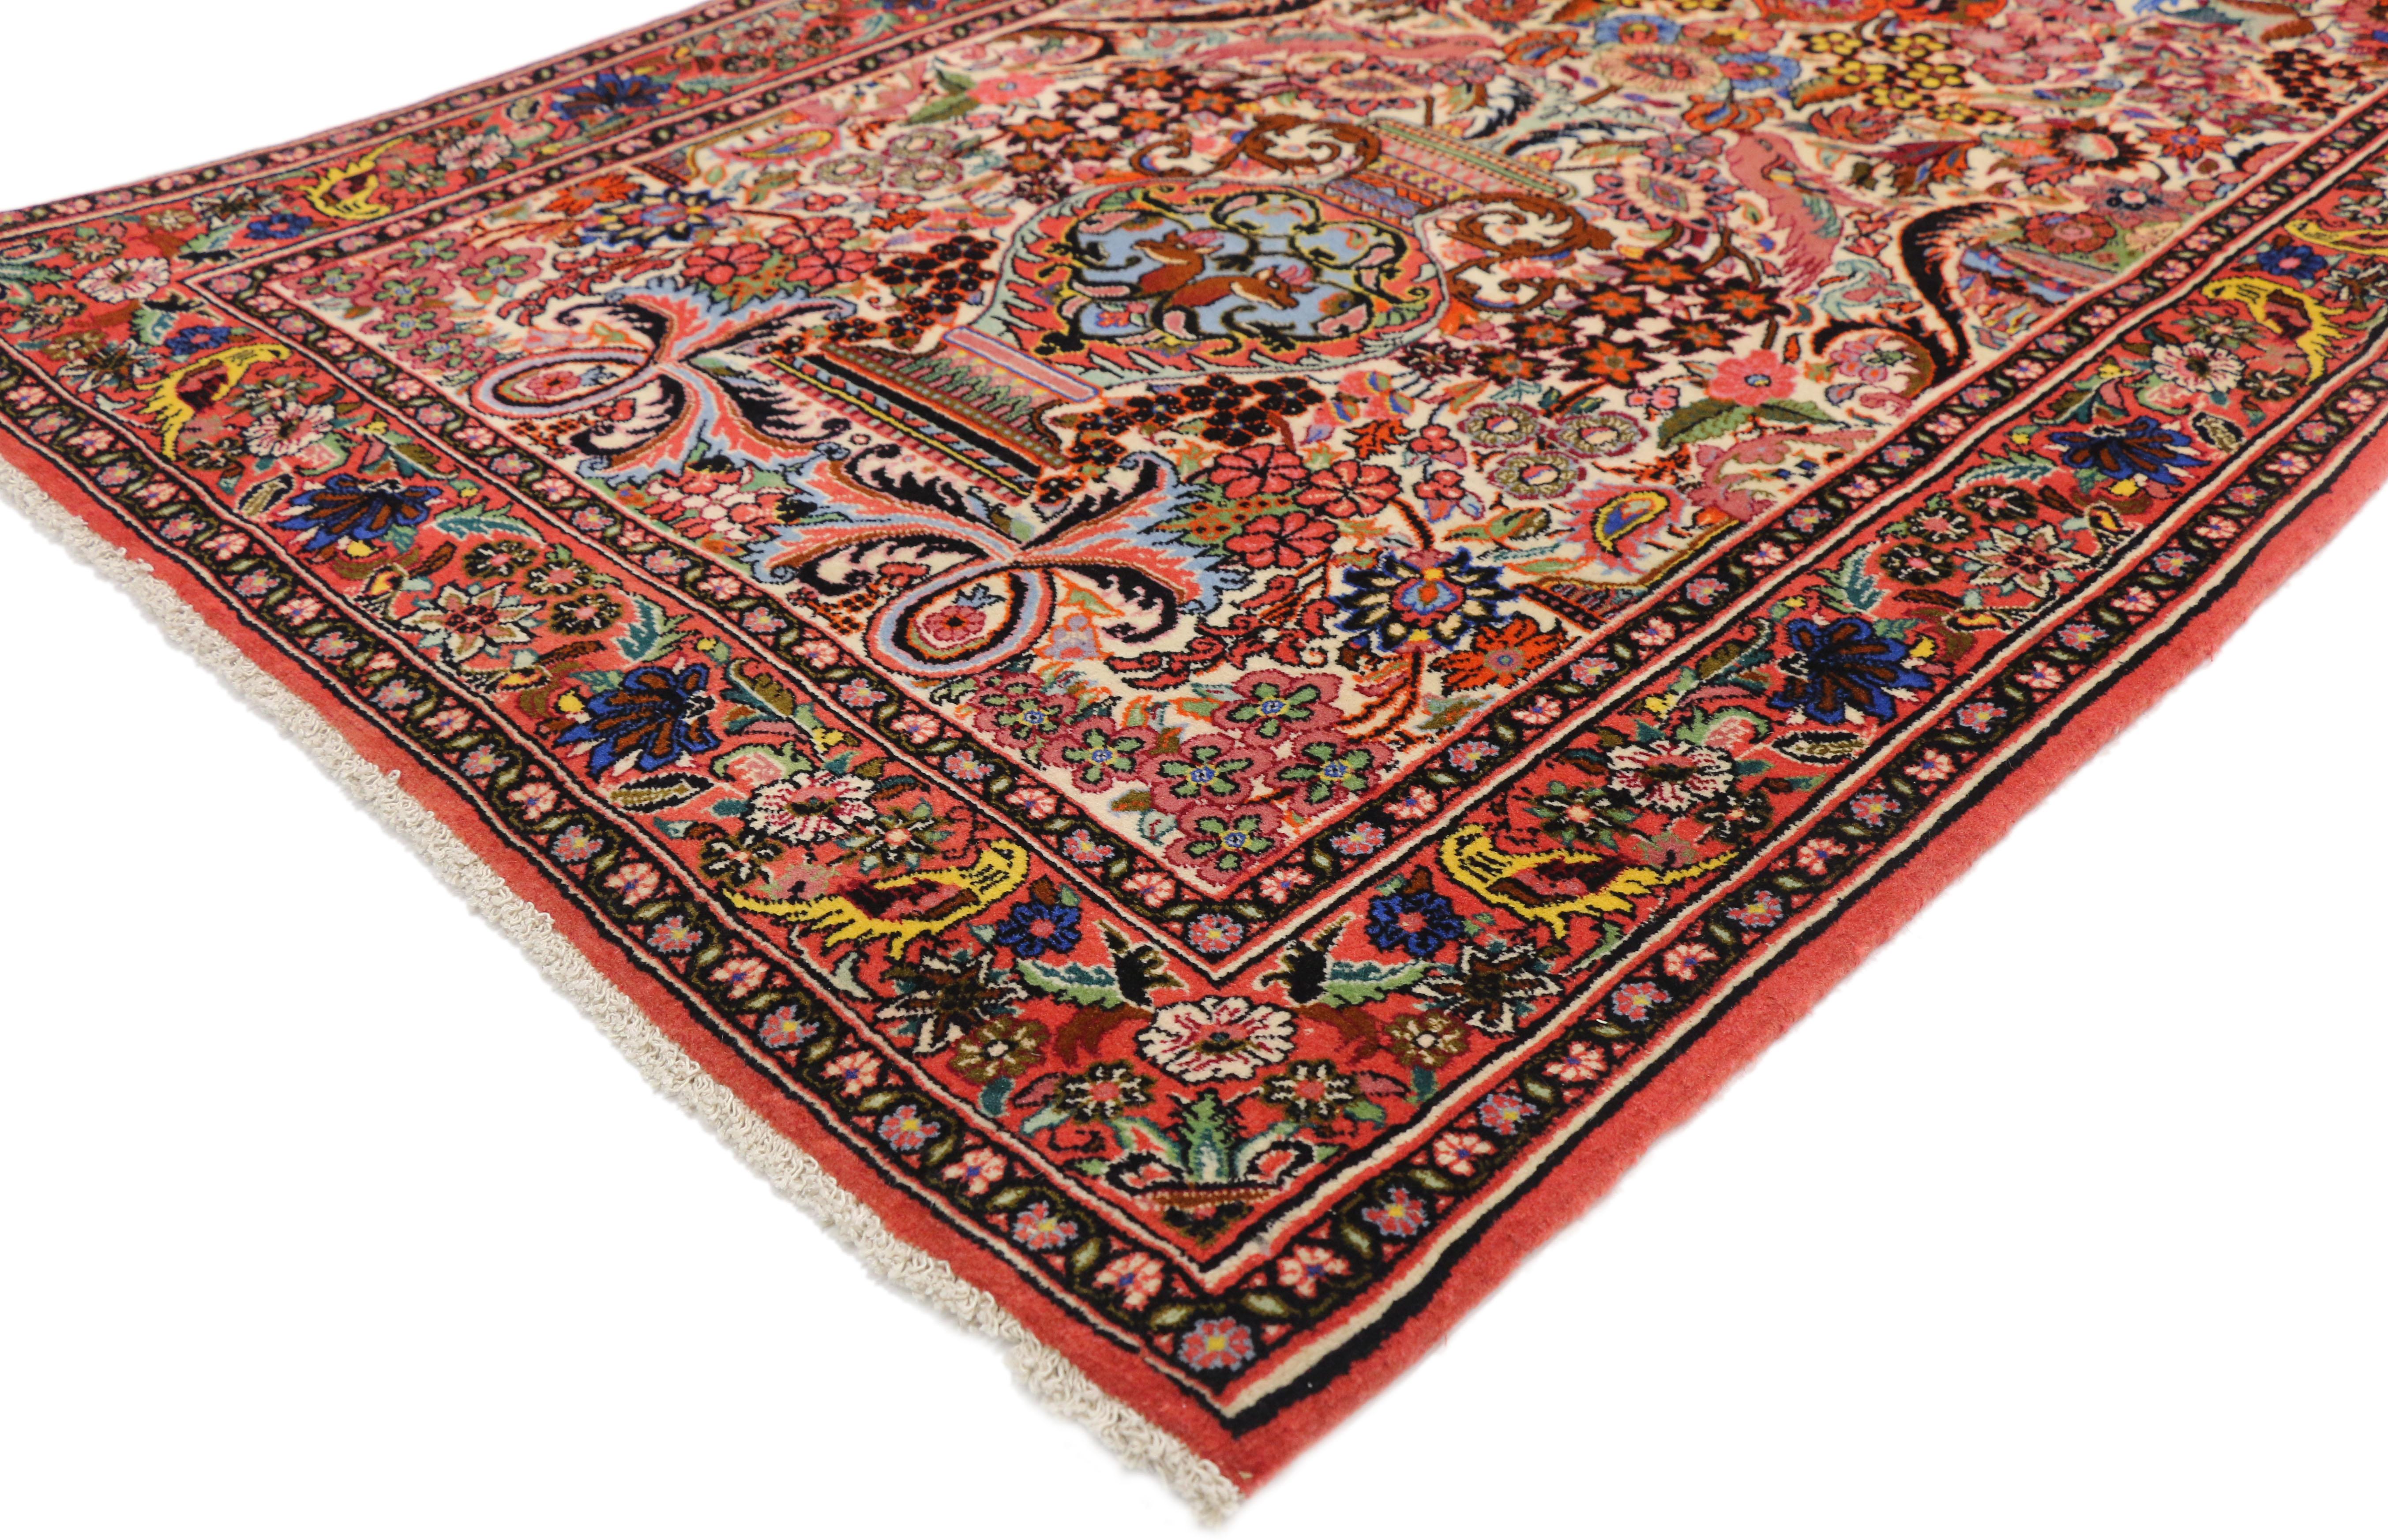 75995, vintage Persian Bijar Kashan floral vase design rug with Art Nouveau style. With an array of florals, birds, arabesque vines, and poly-chromatic millefleur pattern, this hand knotted wool vintage Persian Bijar Kashan rug embodies a true Art